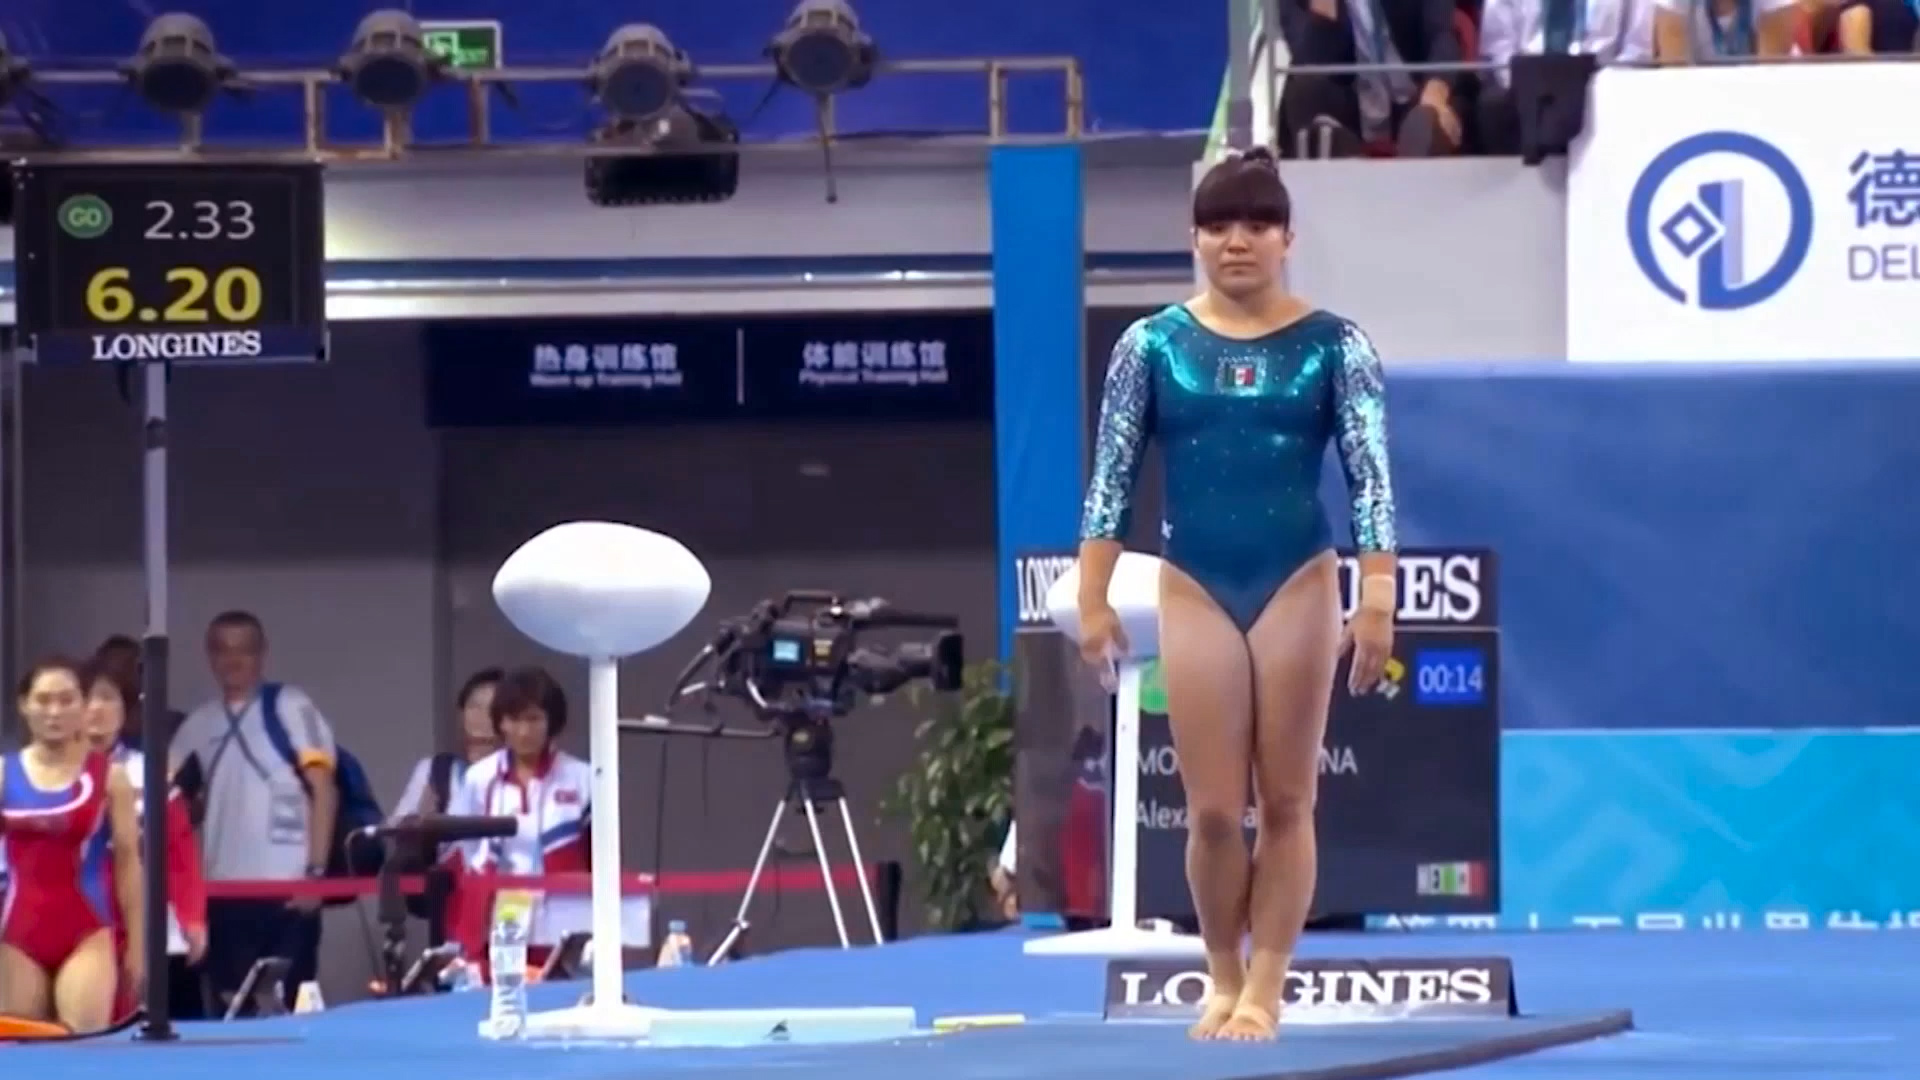 A Mexican Olympic gymnast rises to the occasion